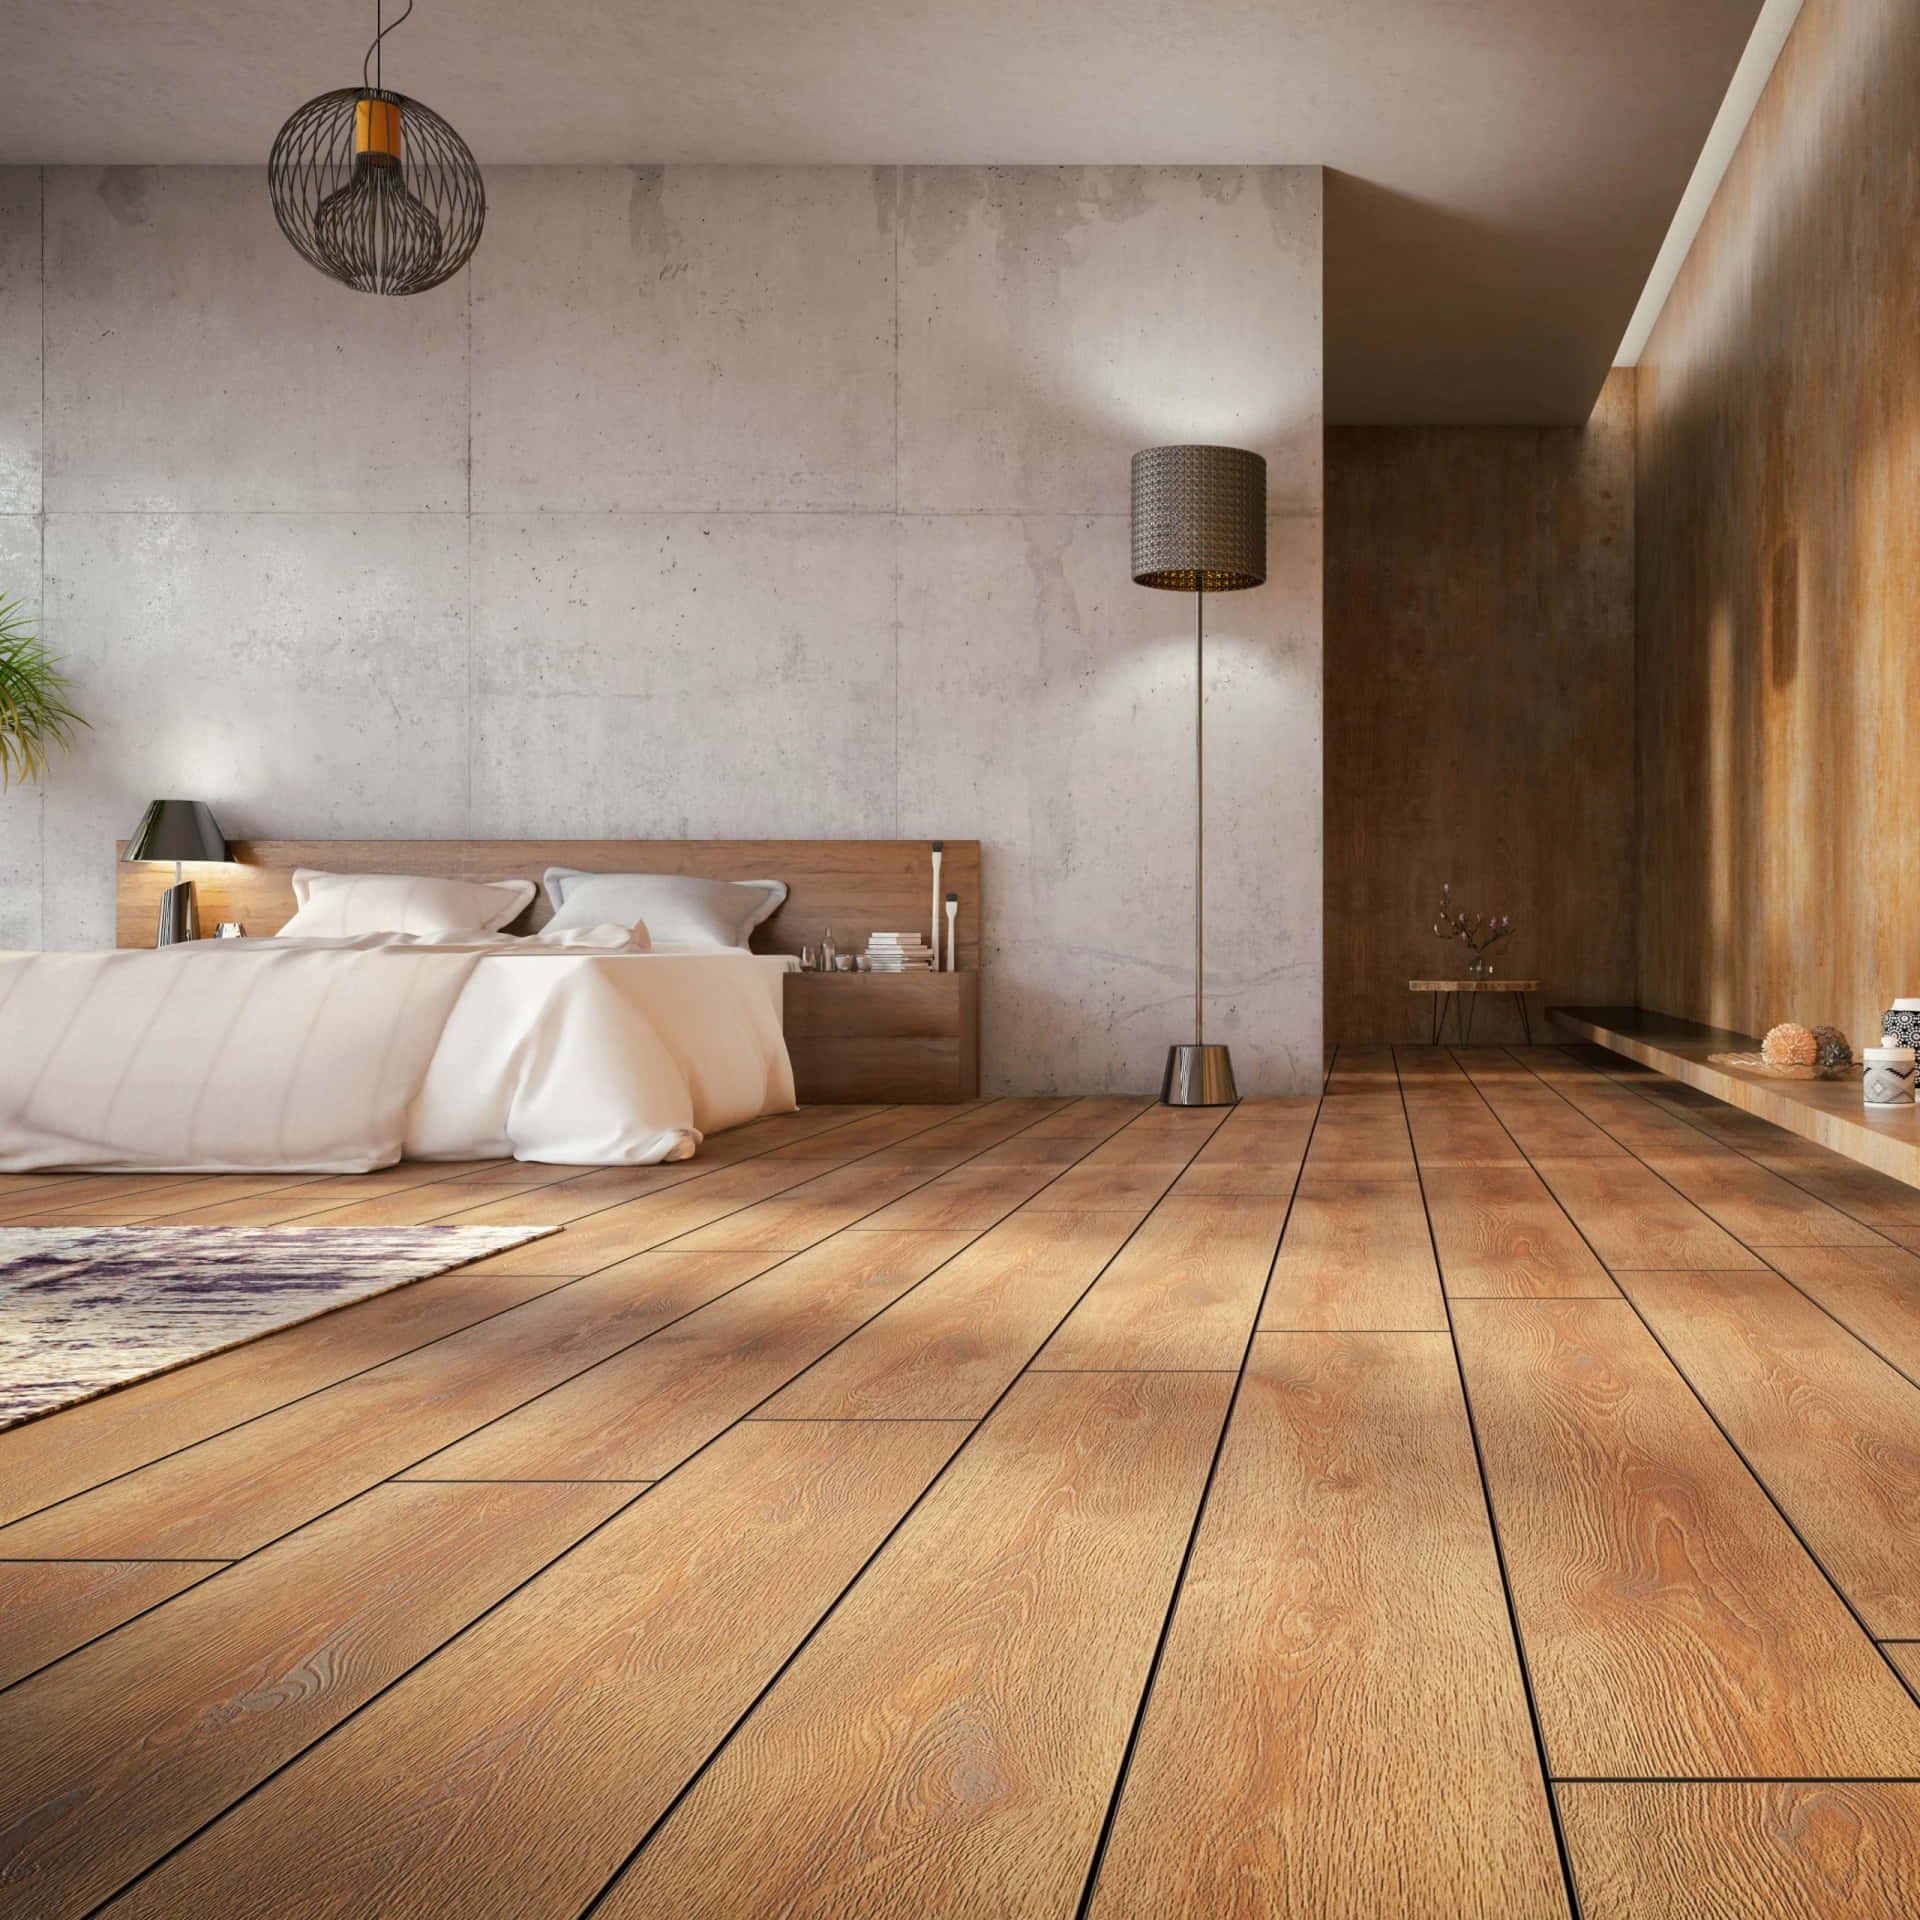 A Bedroom With Wood Floors